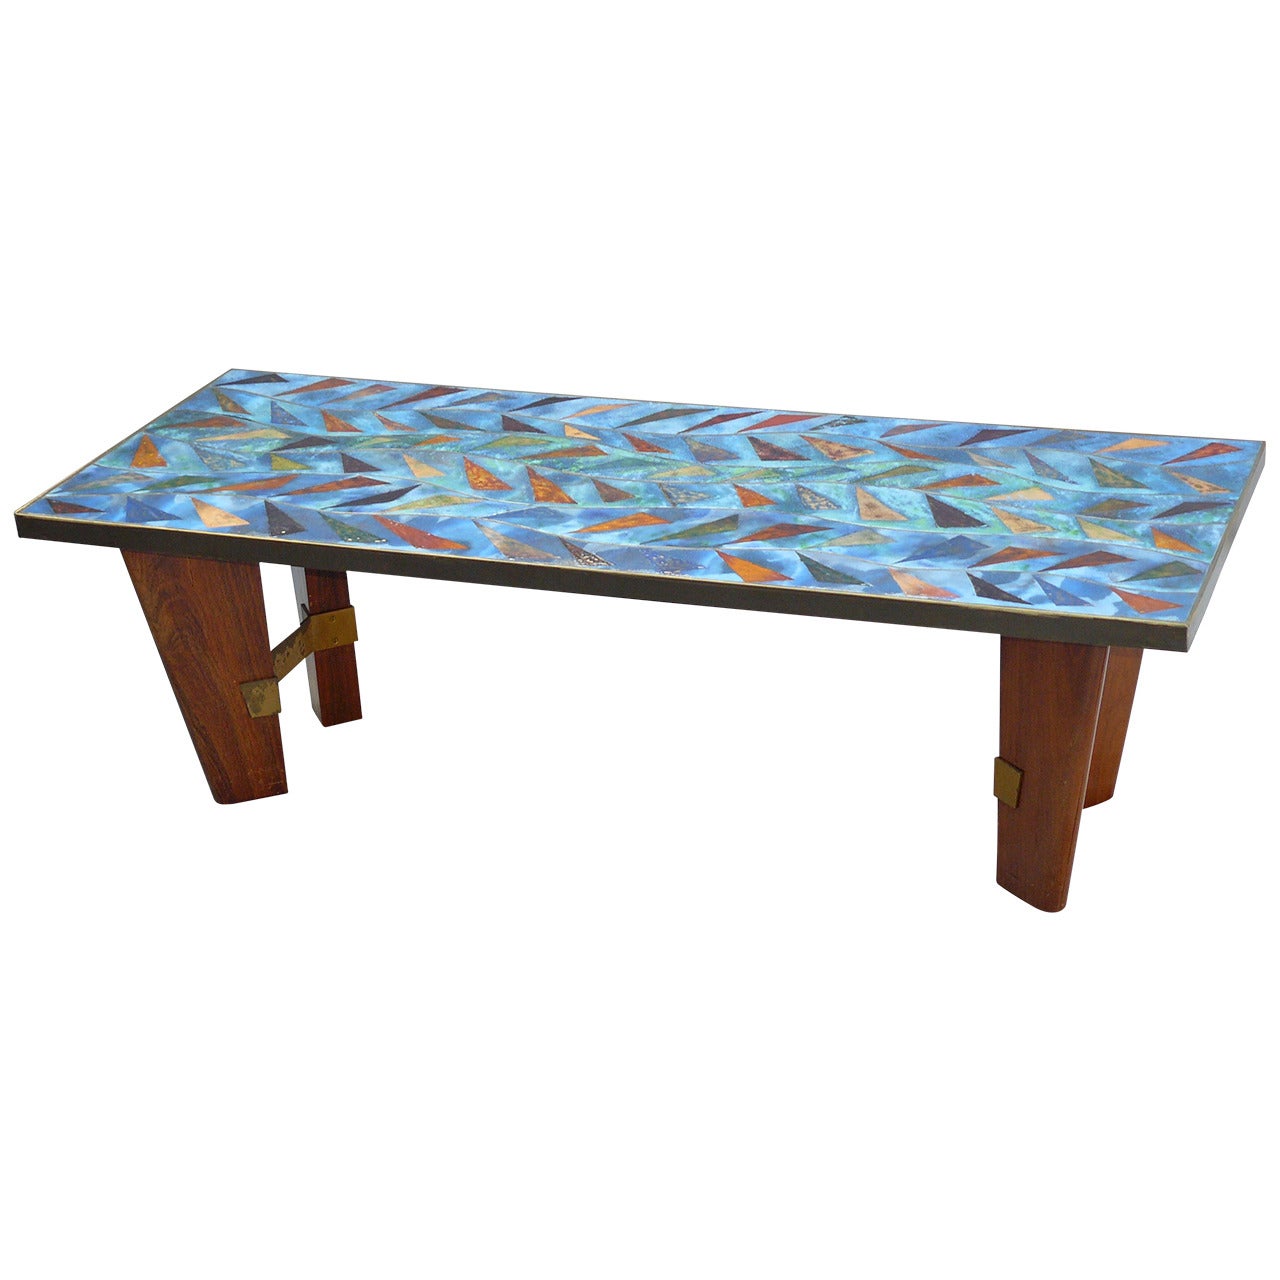 Stunning 1950s Italian Paolo De Poli Attributed Enamel and Rosewood Coffee Table For Sale